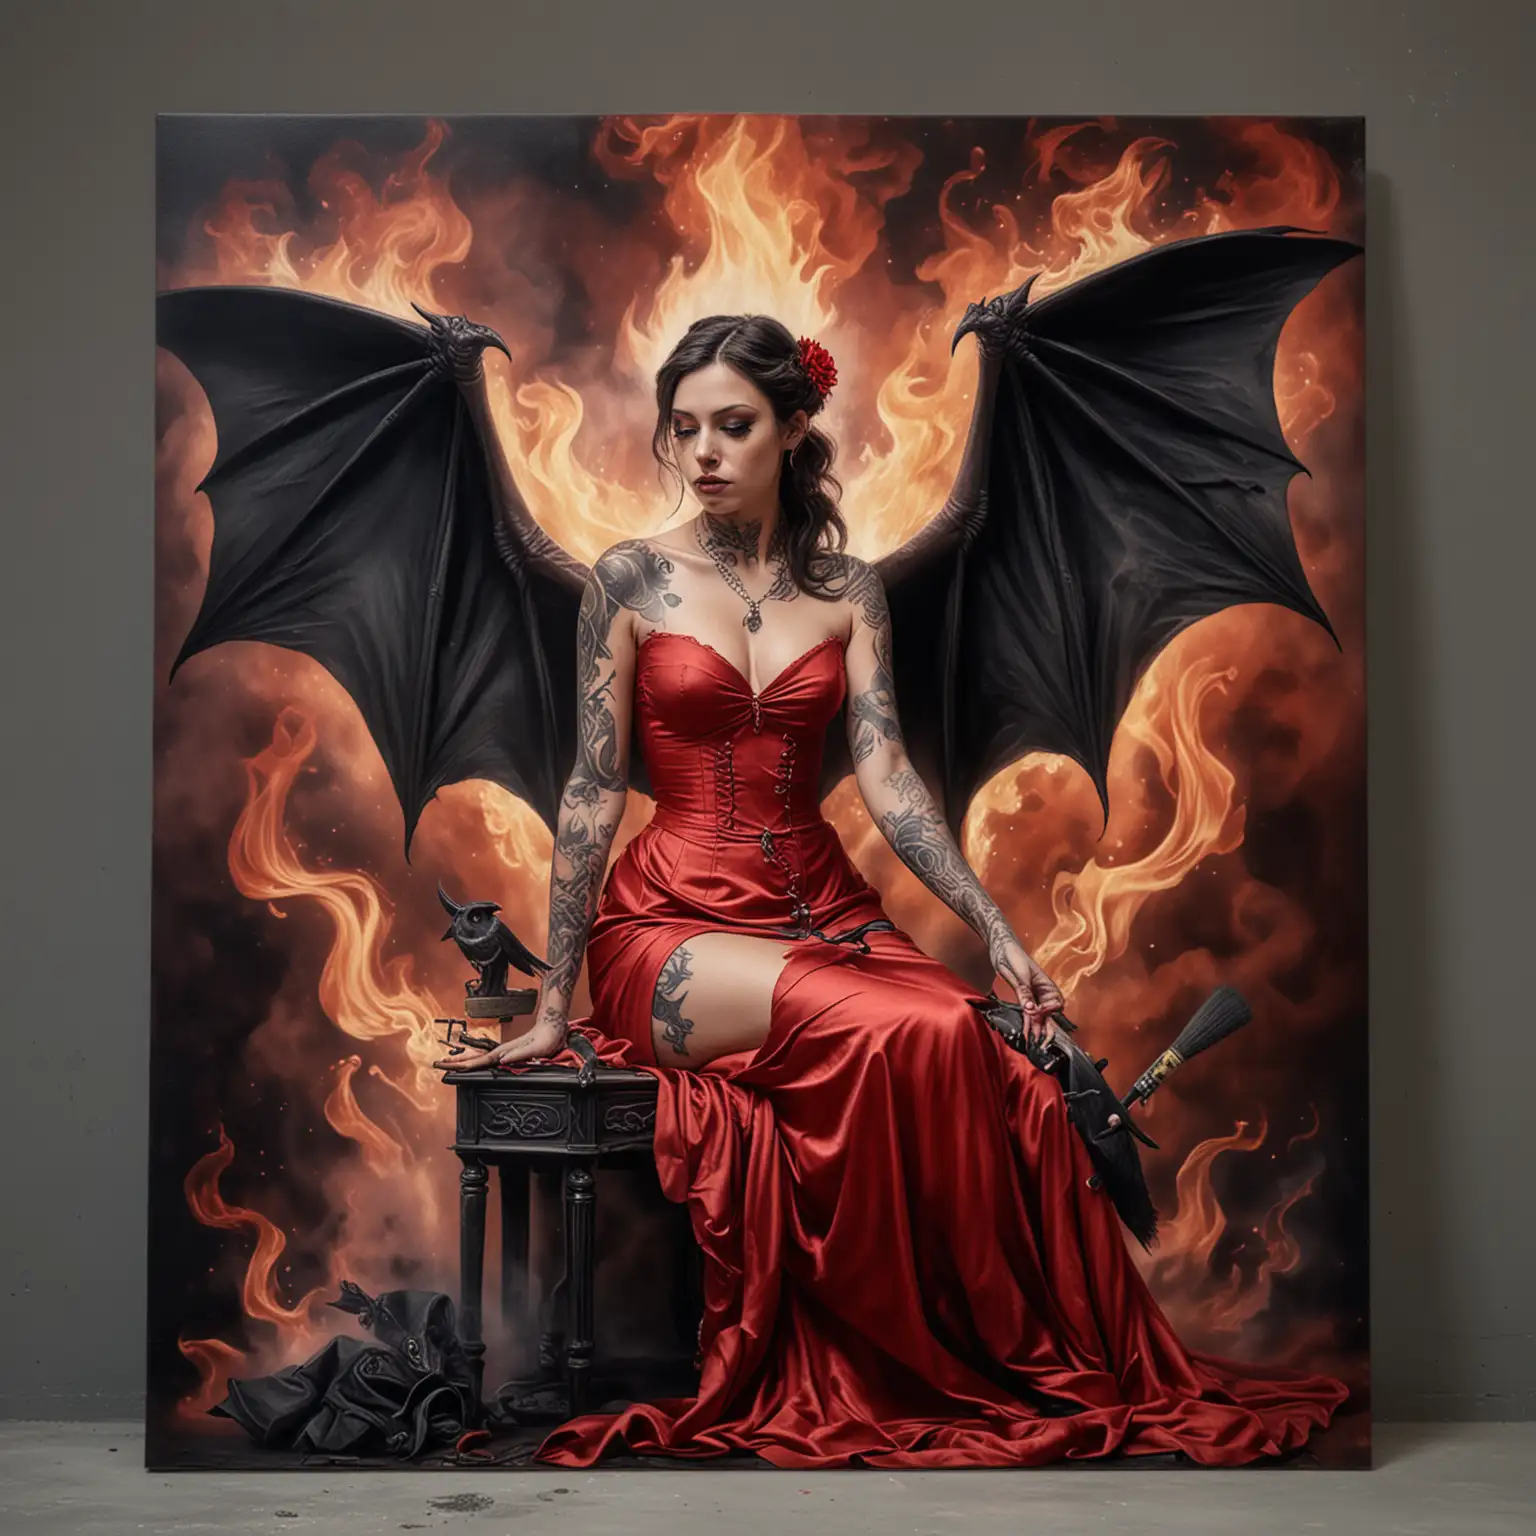 hyper realistic photography
a beautiful tattooed angel, She is a tattoo artist and wearing a red dress while she has black bat wings, seated on cloud of smoke and flames While hold painting brush in her hand and performing a painting on canvas
good rendering